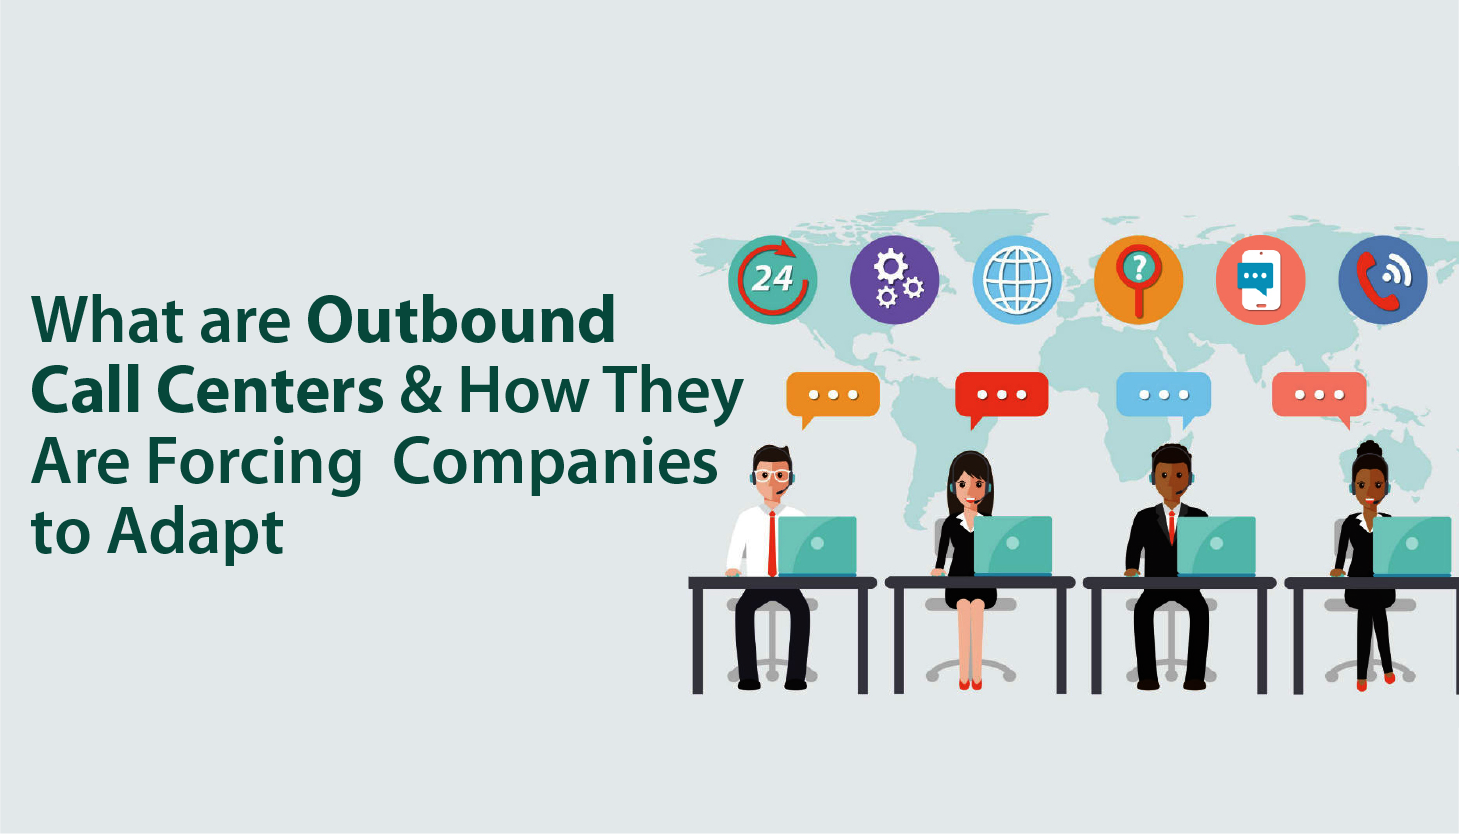  What Are Outbound Call Centers and How They Are Forcing Companies to Adapt?